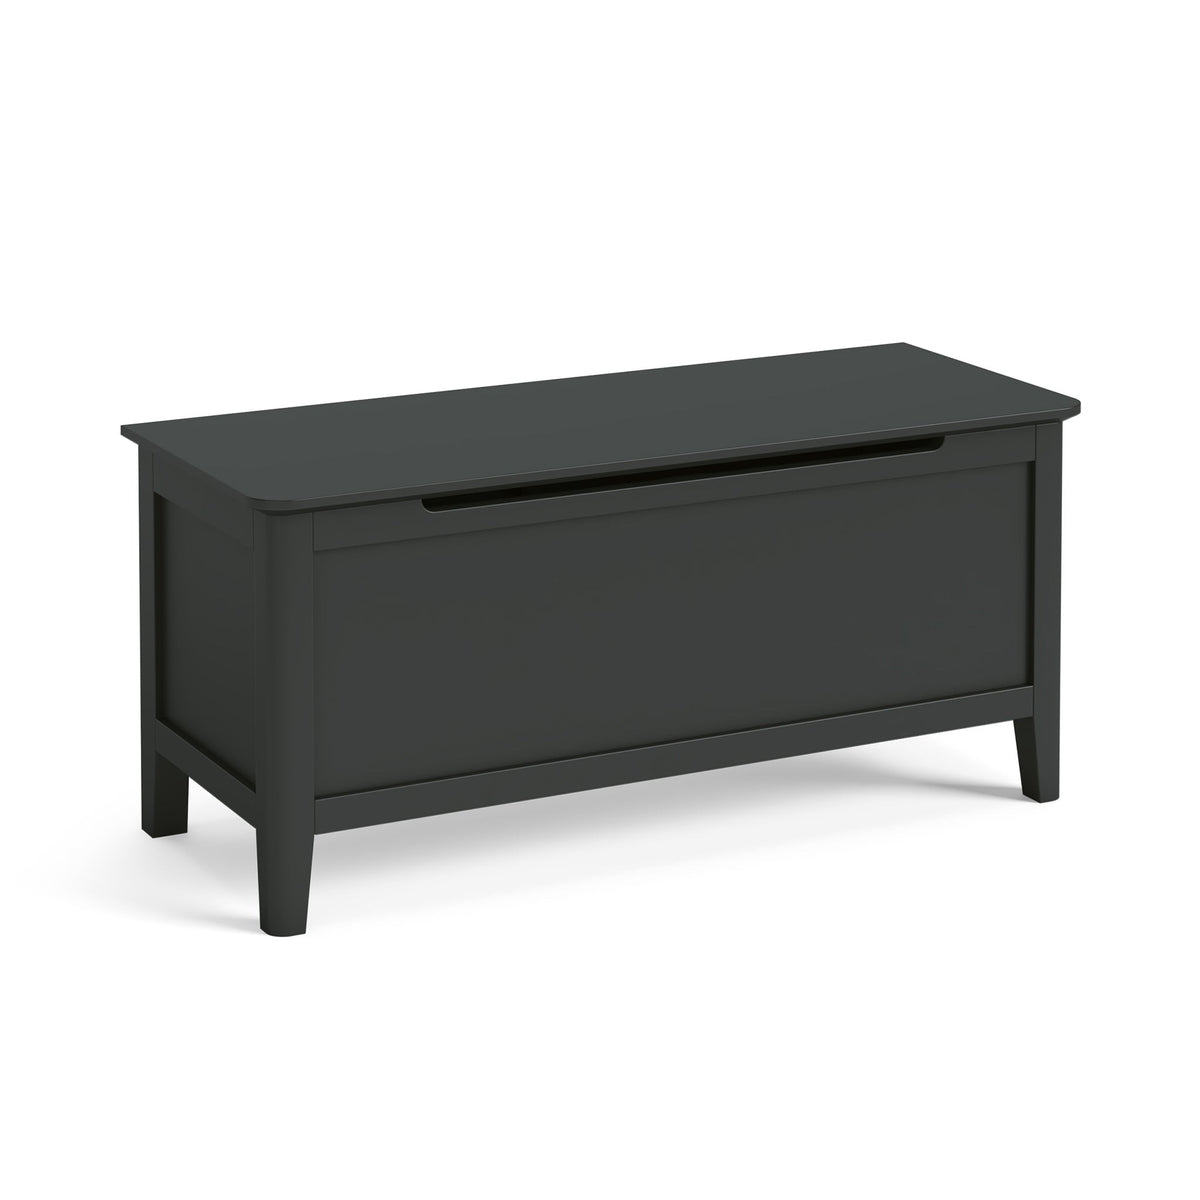 Dumbarton Charcoal Grey Blanket Storage Ottoman Box for Bedroom from Roseland Furniture